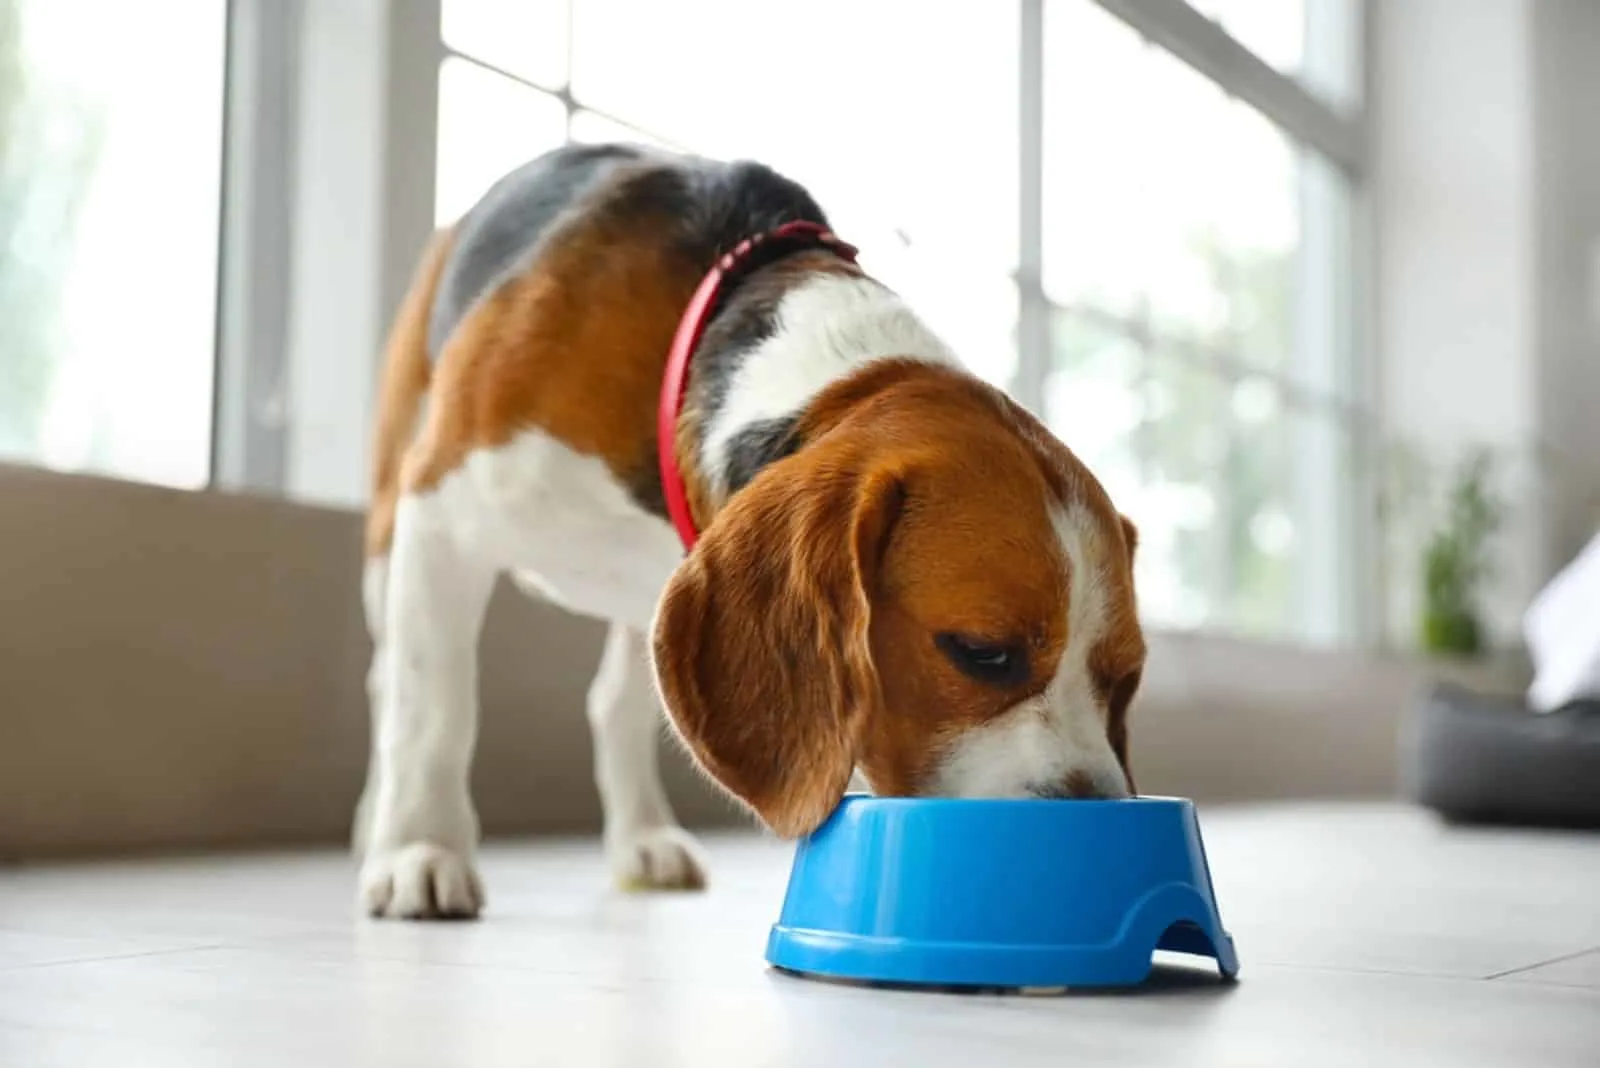 Cute Beagle dog eating food from blue bowl at home